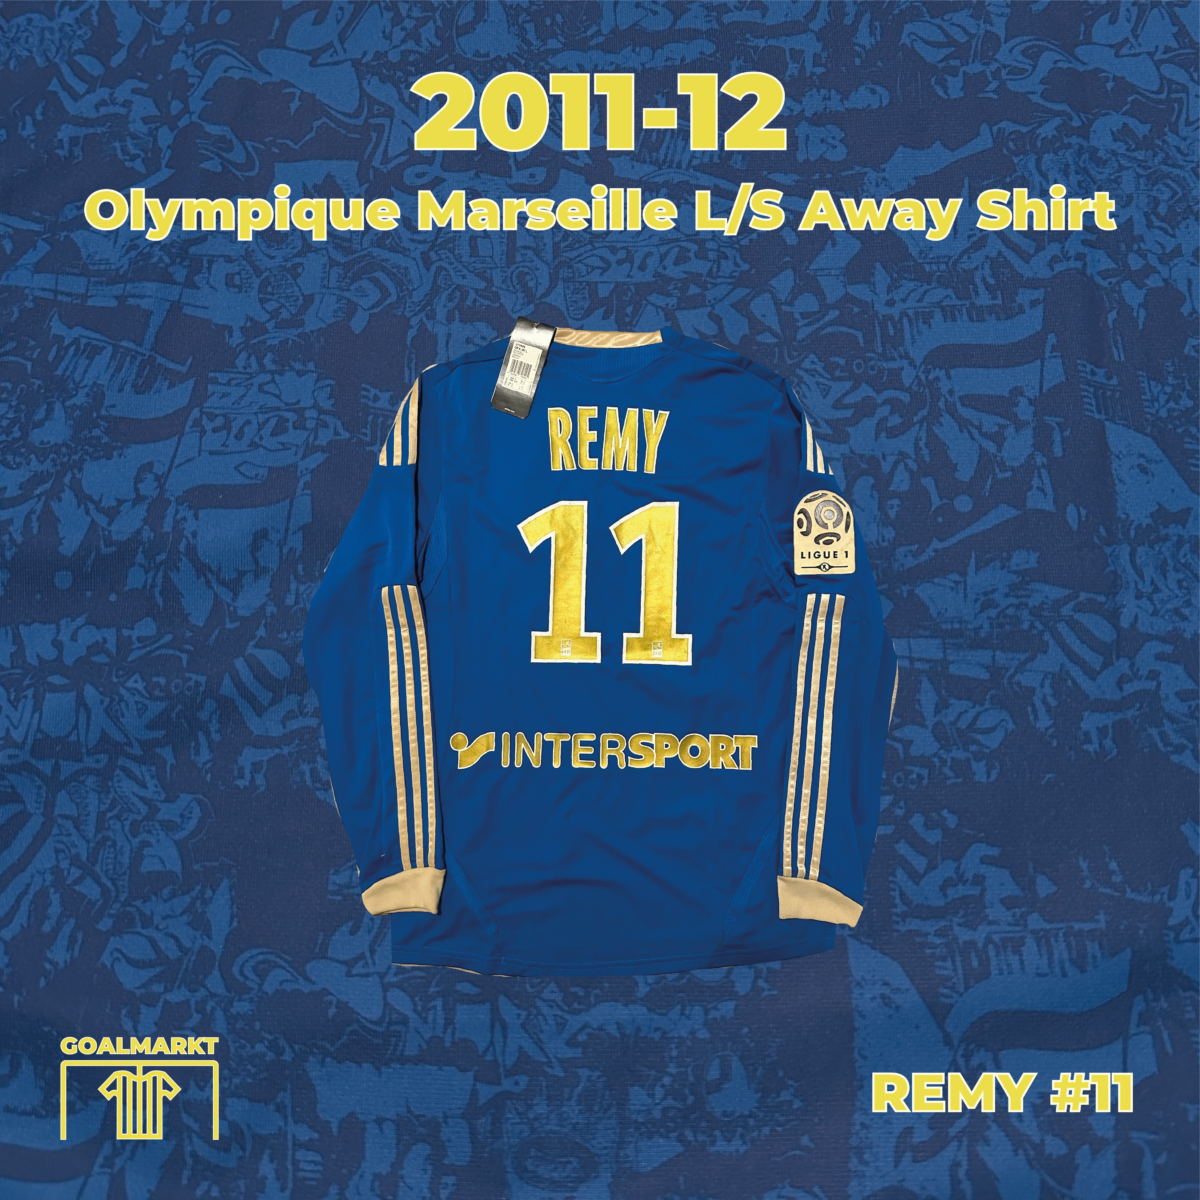 2011-12 Olympique Marseille L/S Away Shirt Remy #11 M